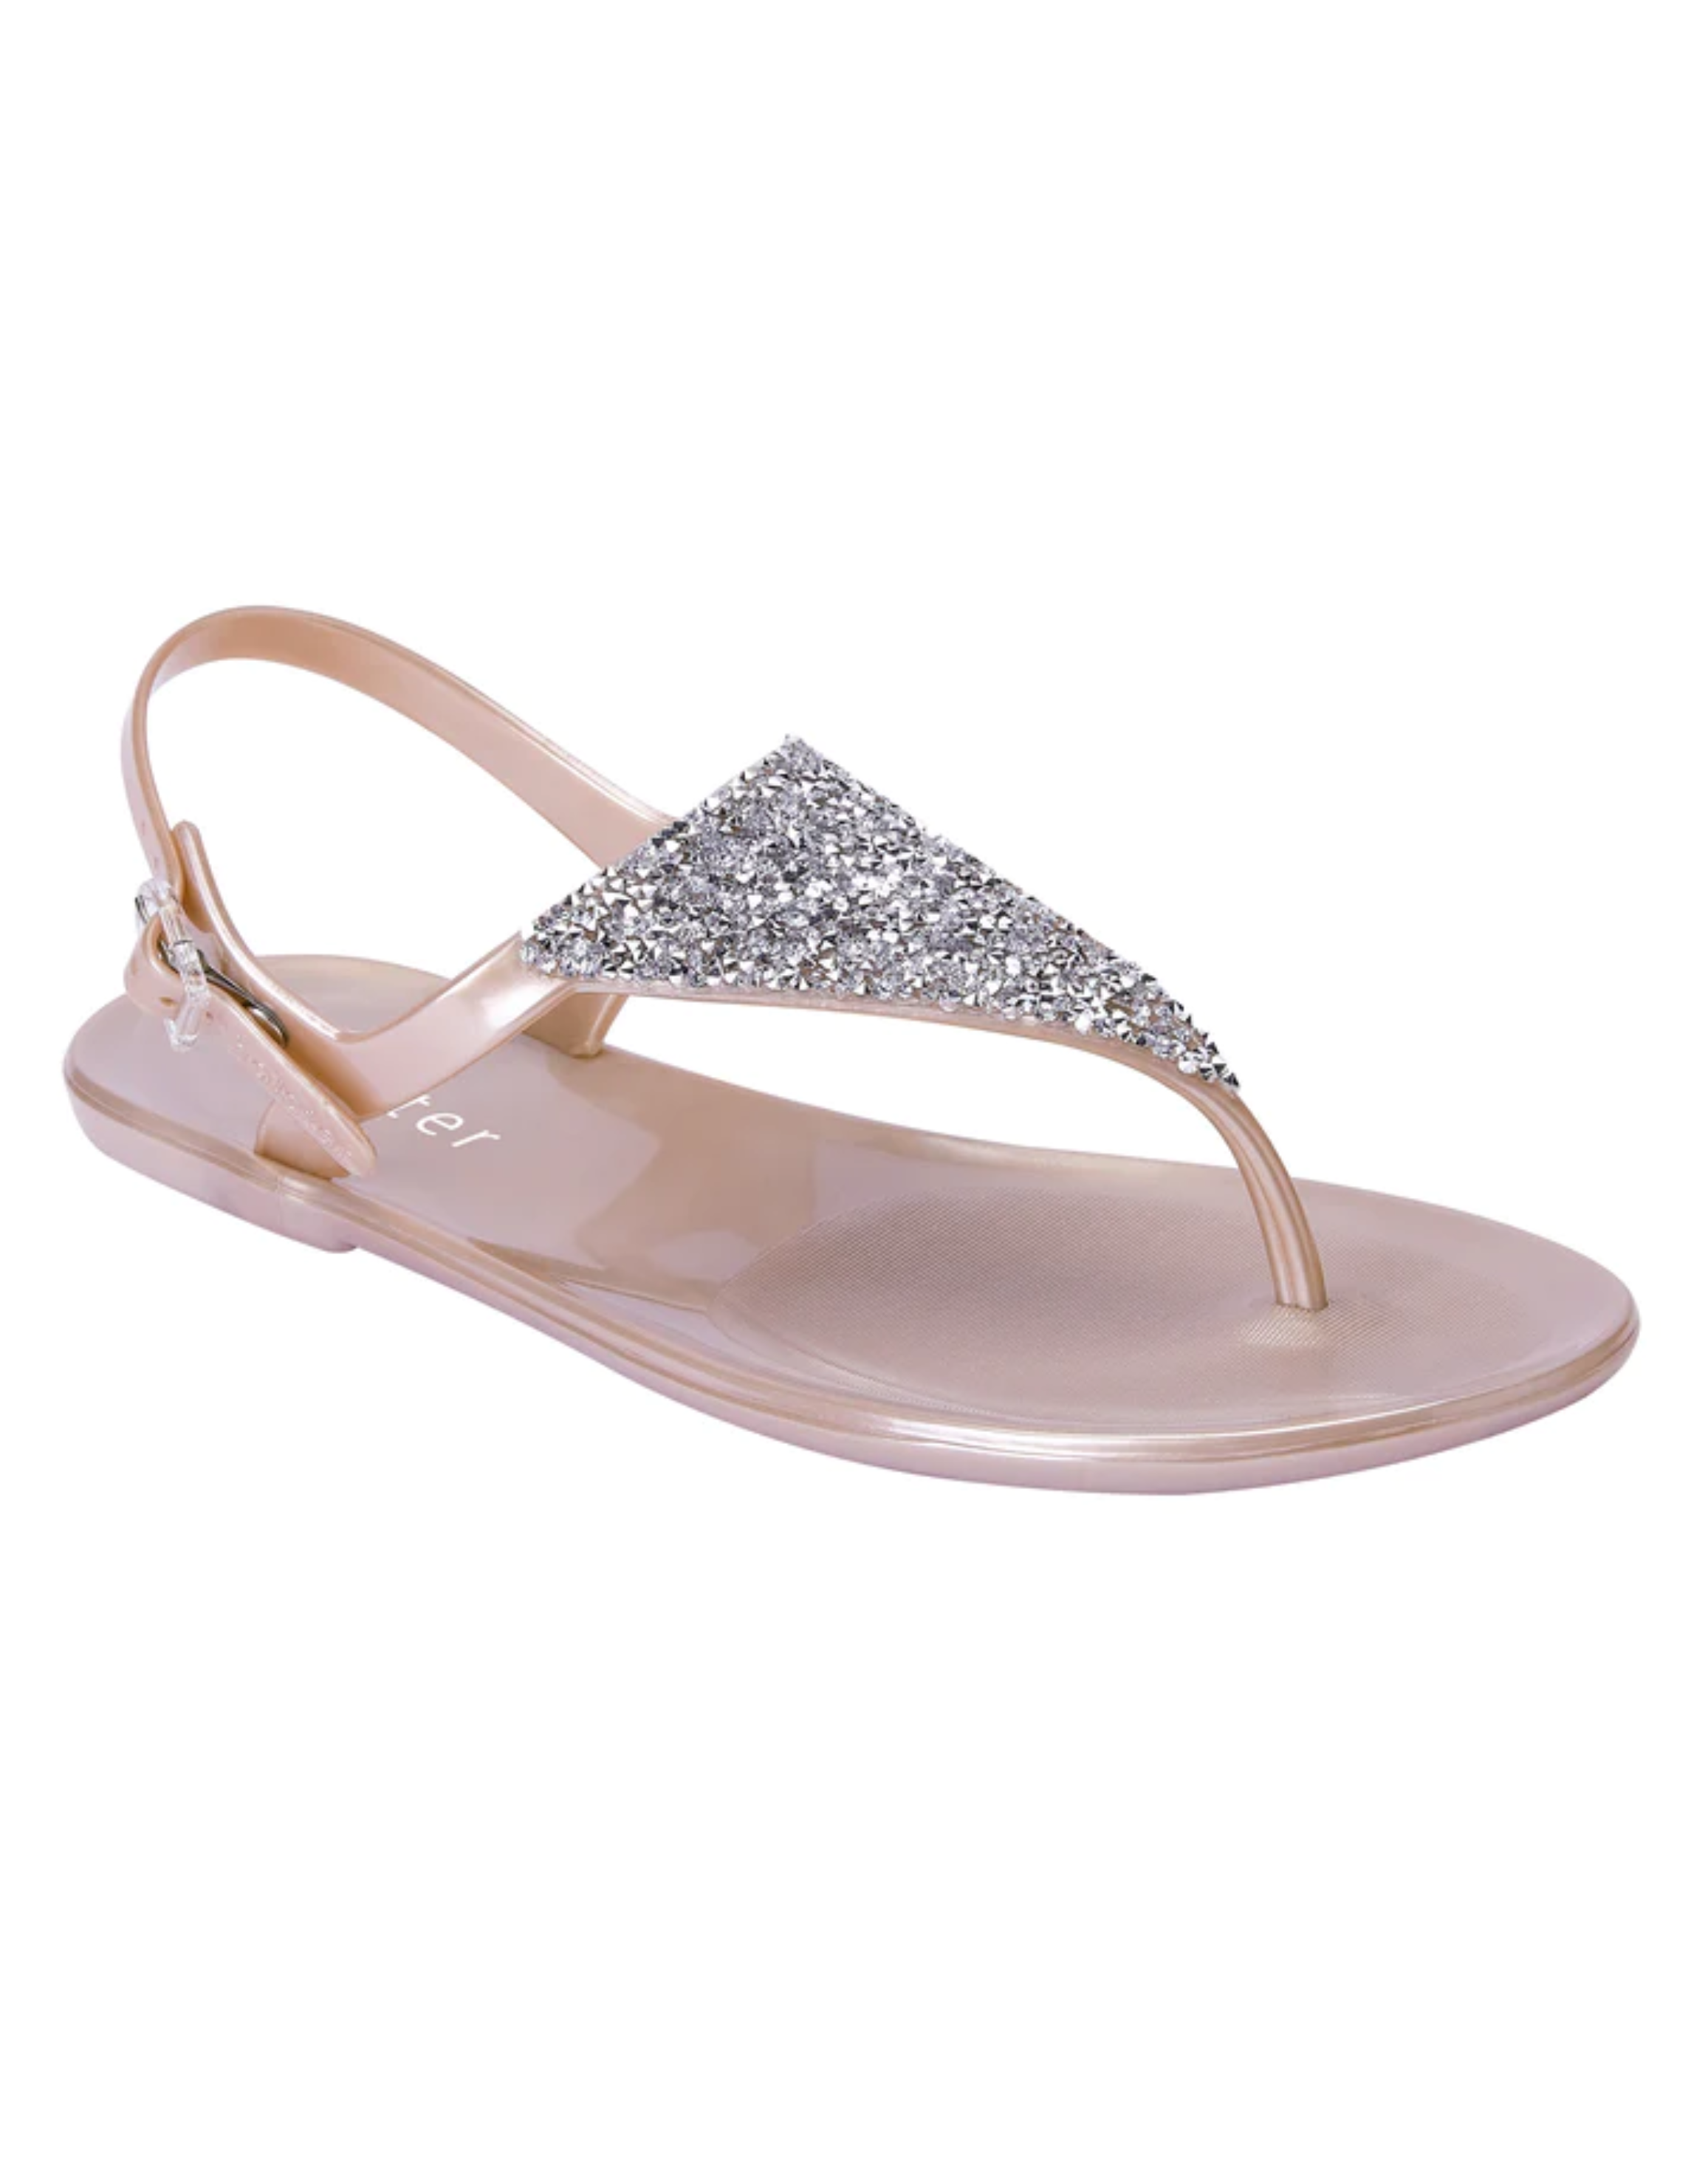 HOLSTER ROSE GOLD ZOEY SANDAL | Rosella - Style inspired by elegance